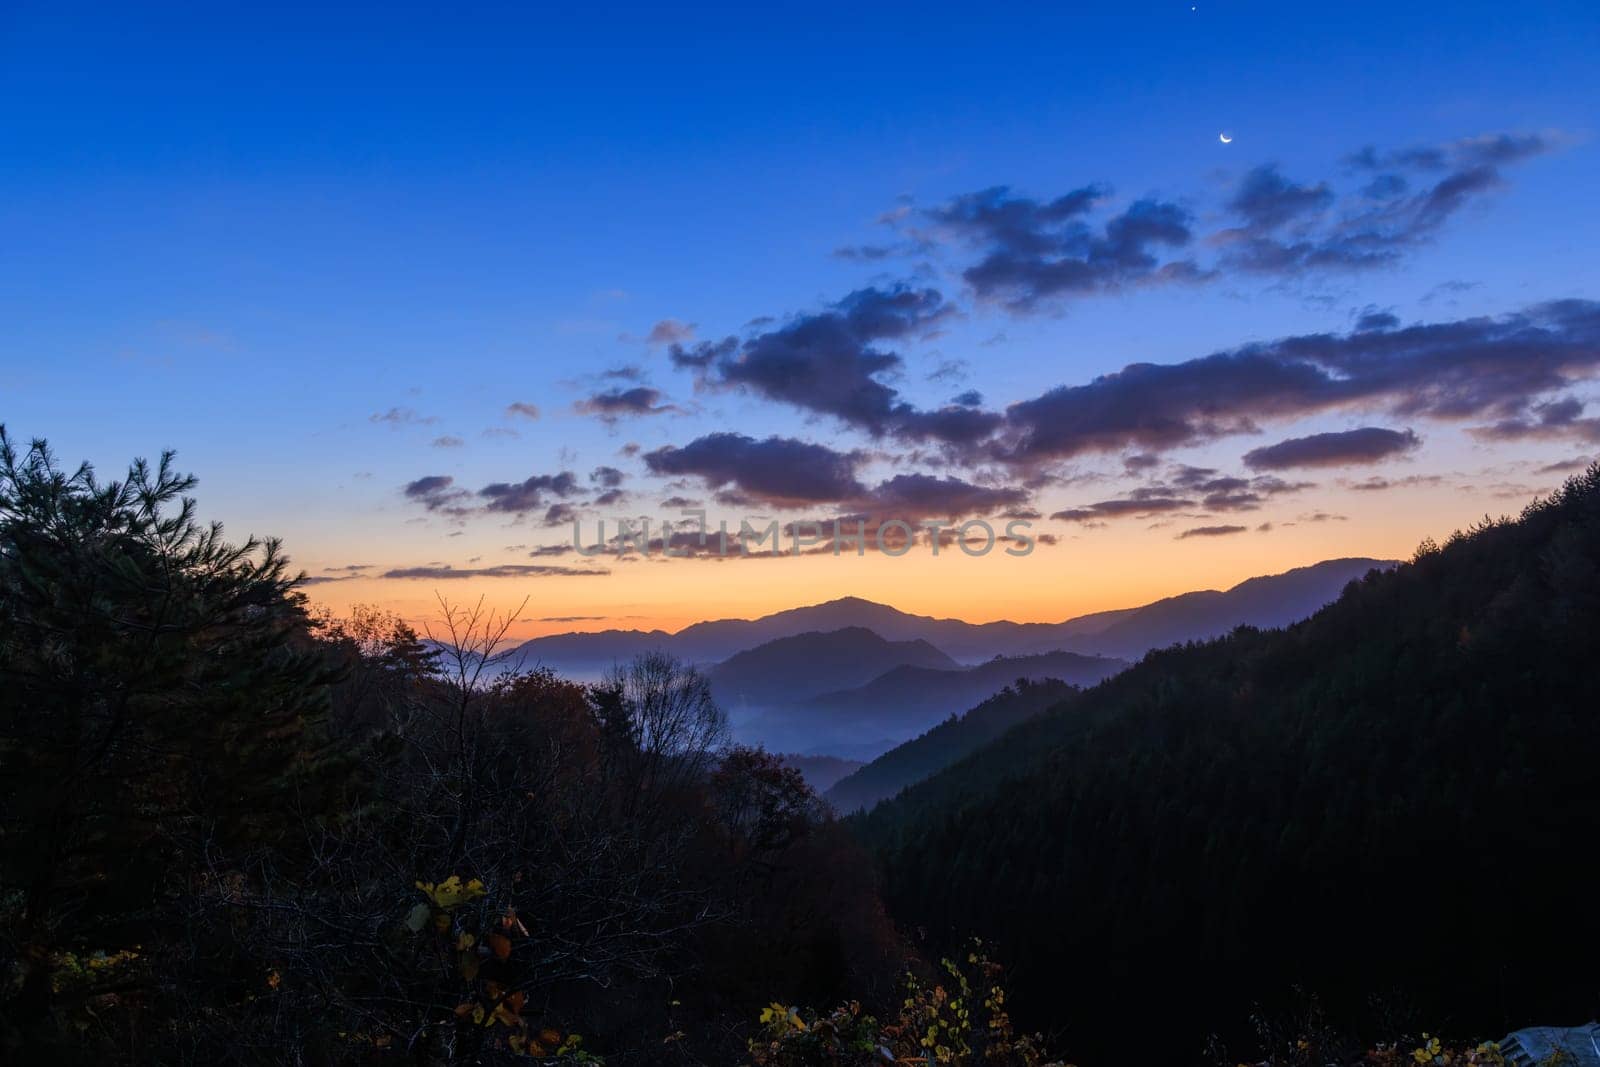 Dawn fog and mist in mountain valley with sunrise glow and moon in sky. High quality photo